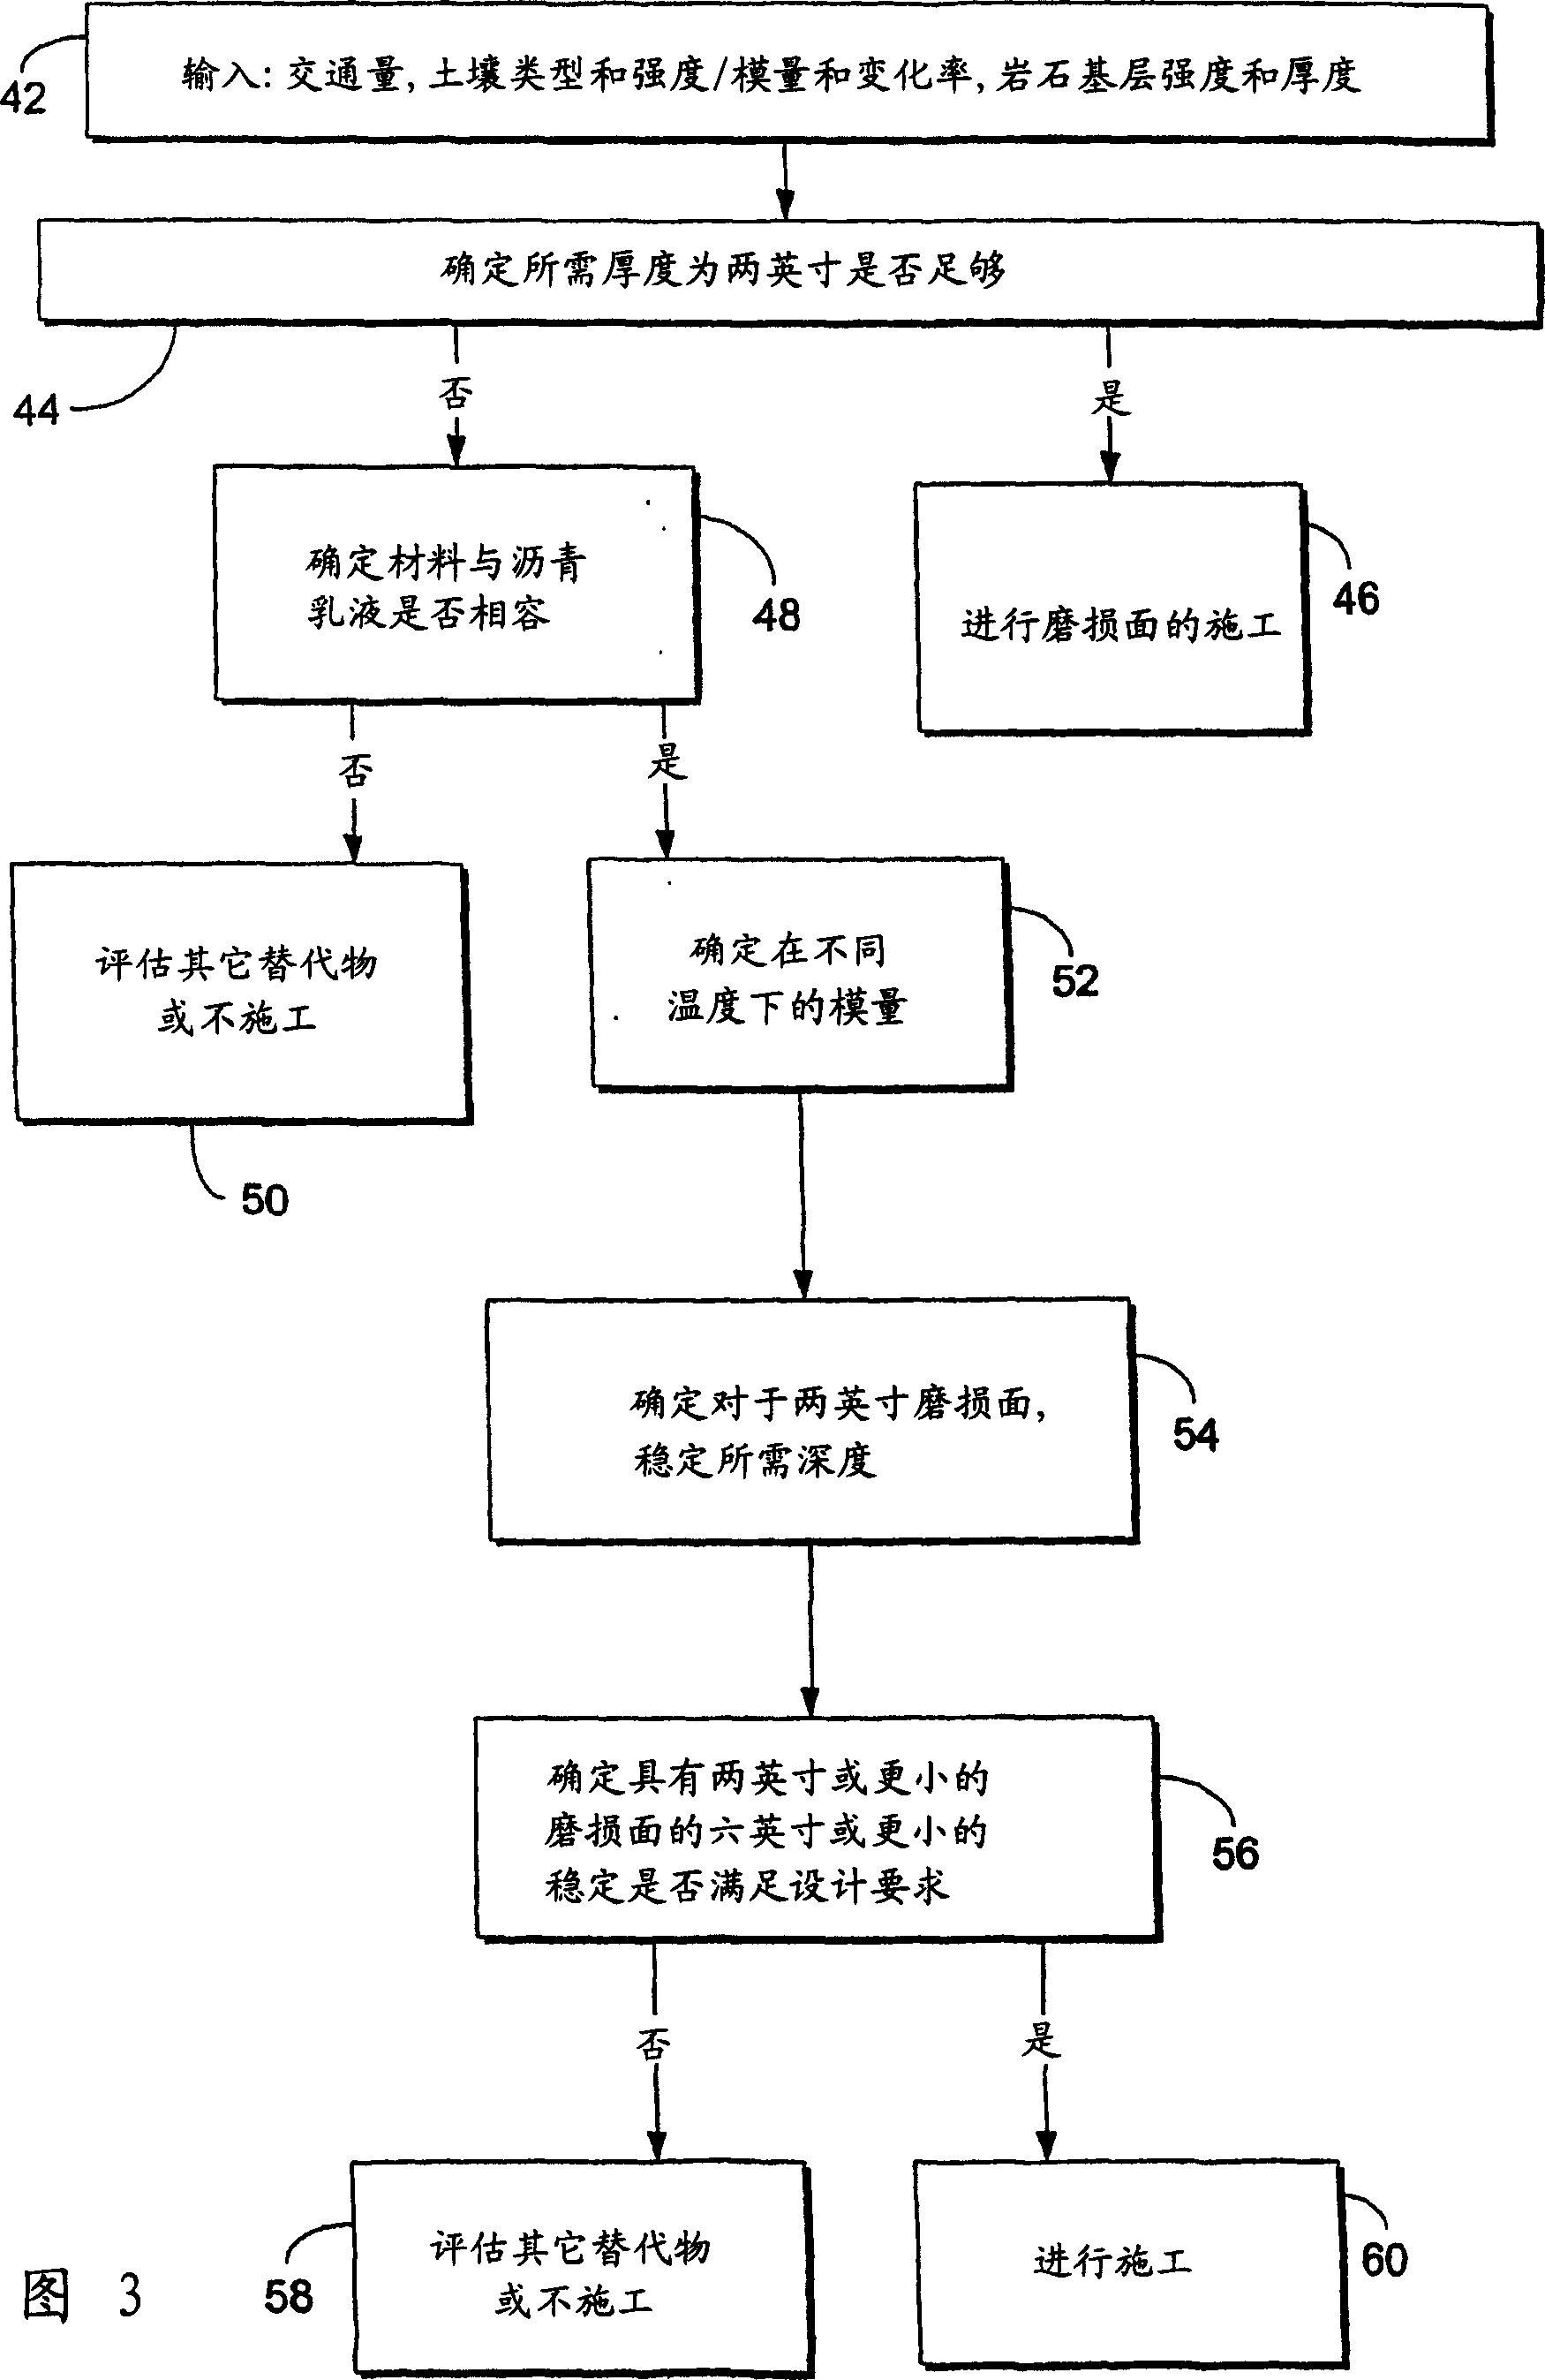 Method of upgrading gravel and/or dirt roads and a composite road resulting therefrom